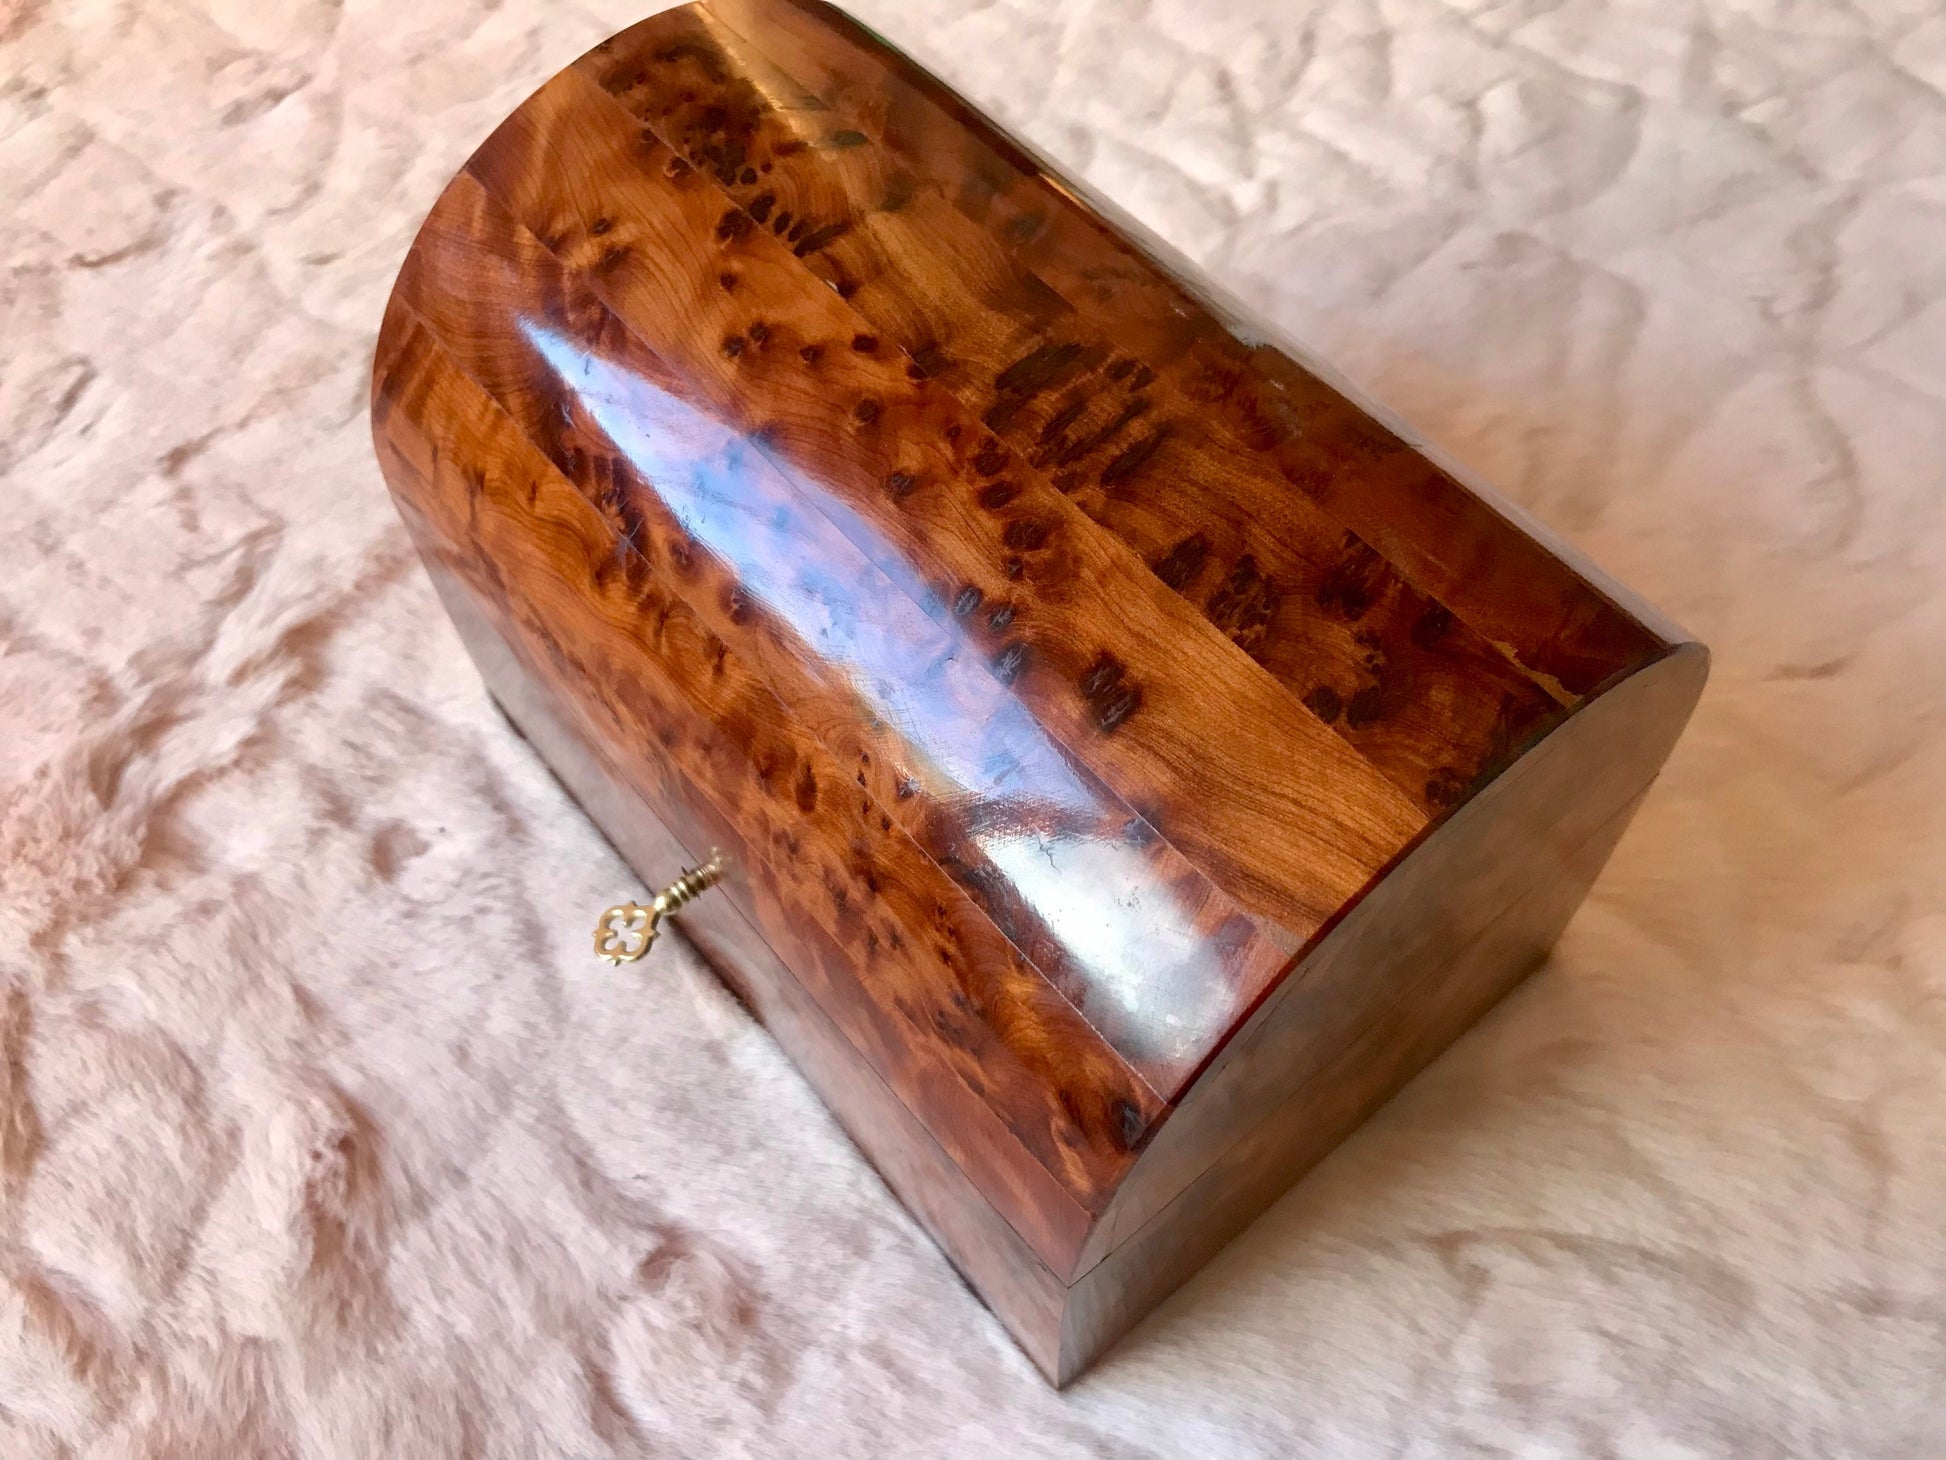 Moroccan Jewelry wooden box with key,mexican antique style organizer box,burl box,lockable coffer,couples gift,wedding Jewelry memory box